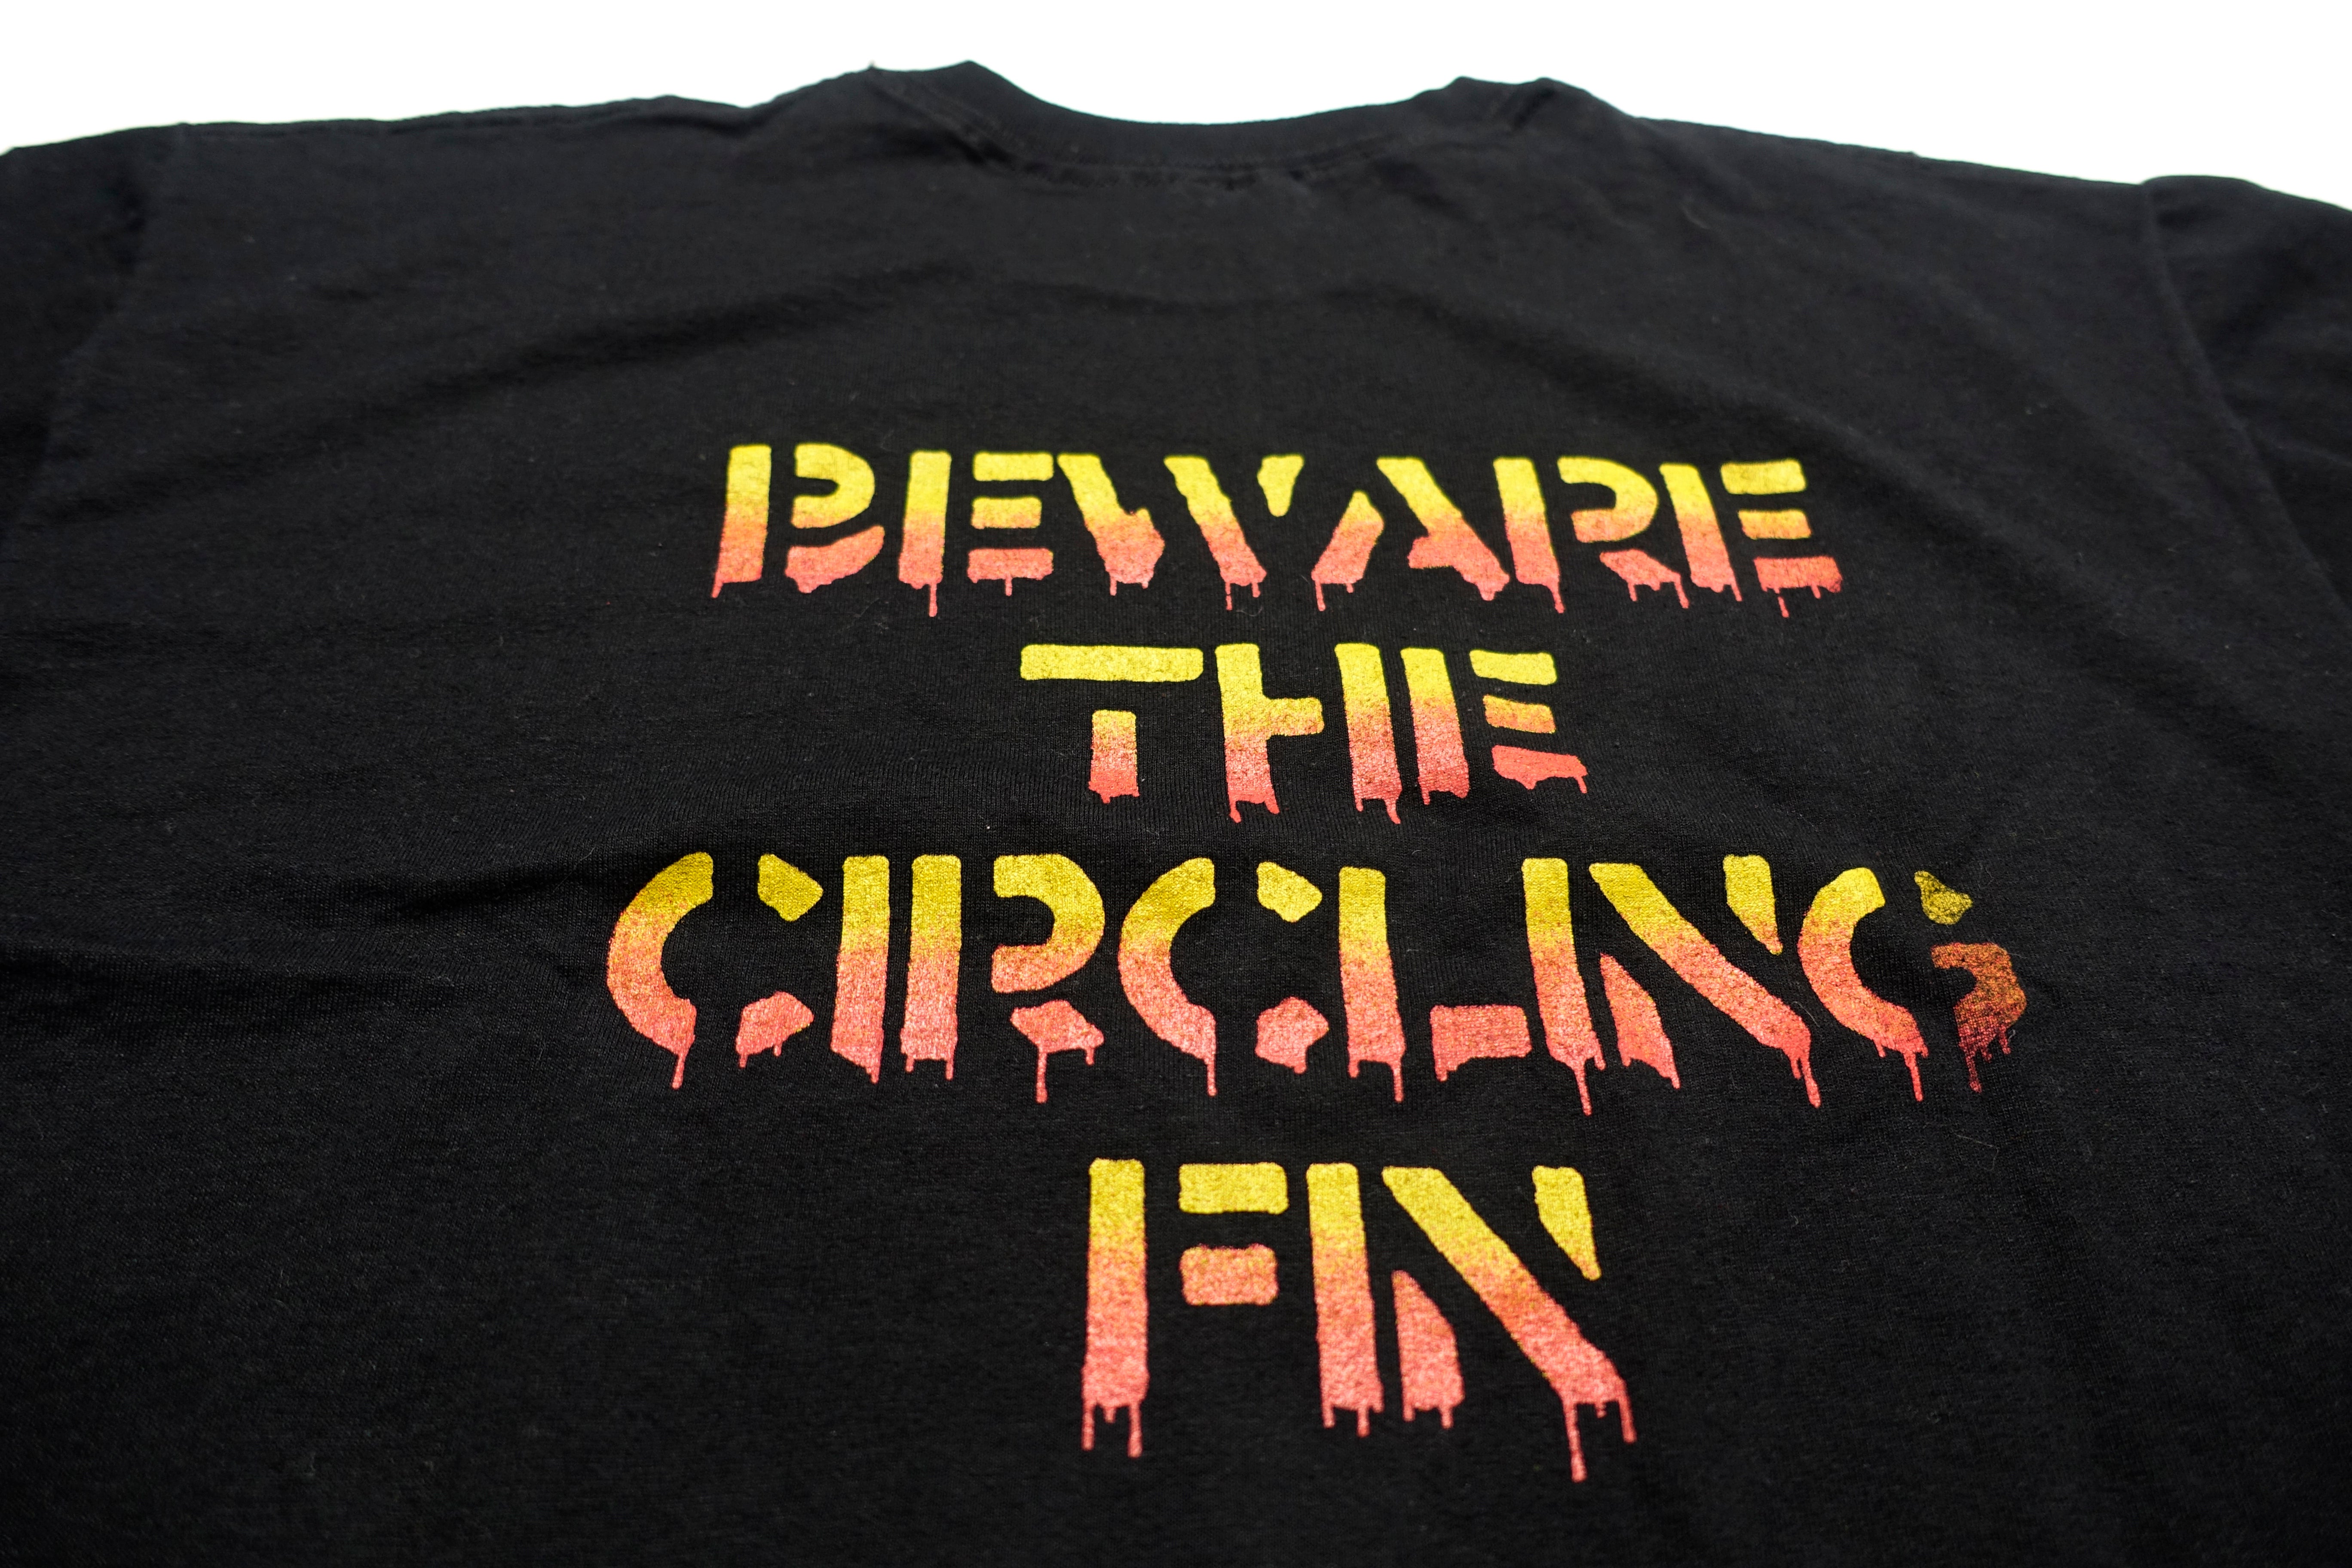 Early Man - Beware The Circling Fin 2008 Tour Shirt Size Large